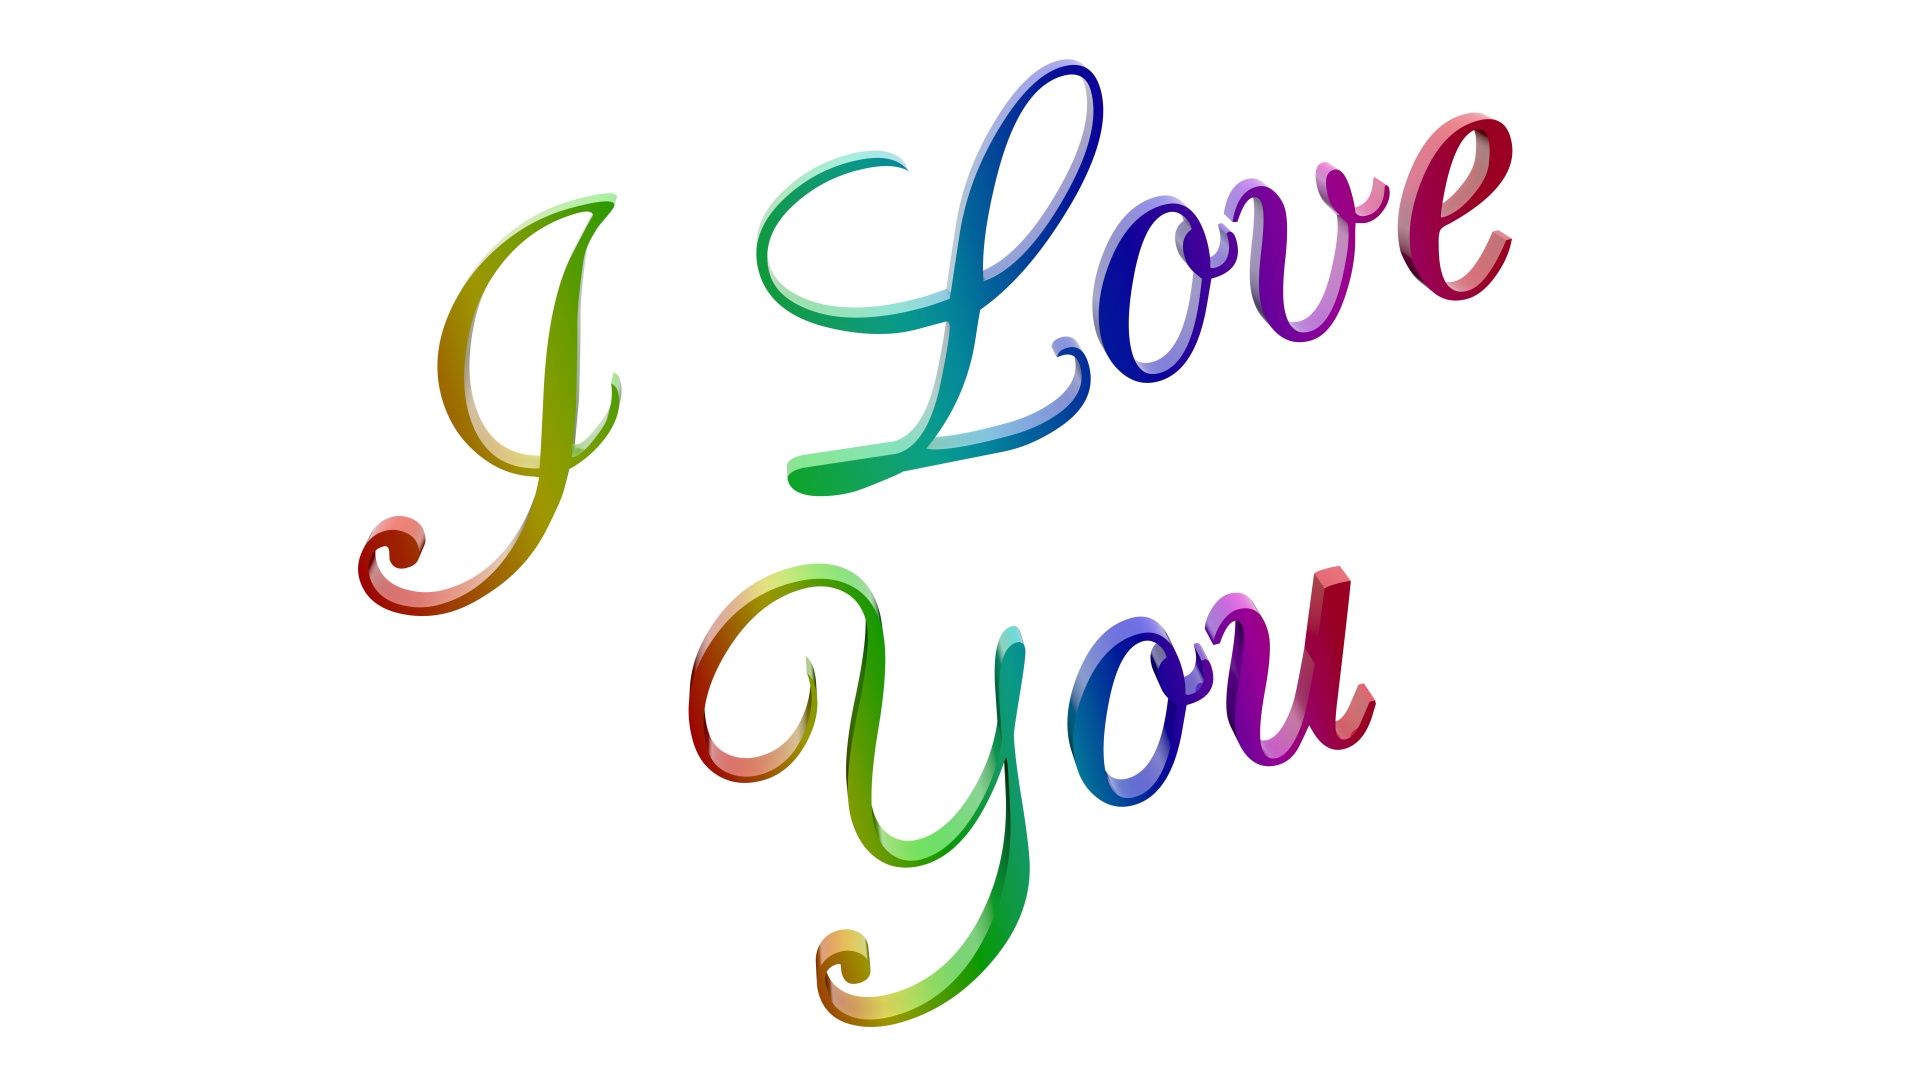 i love you cac champagne font free photo